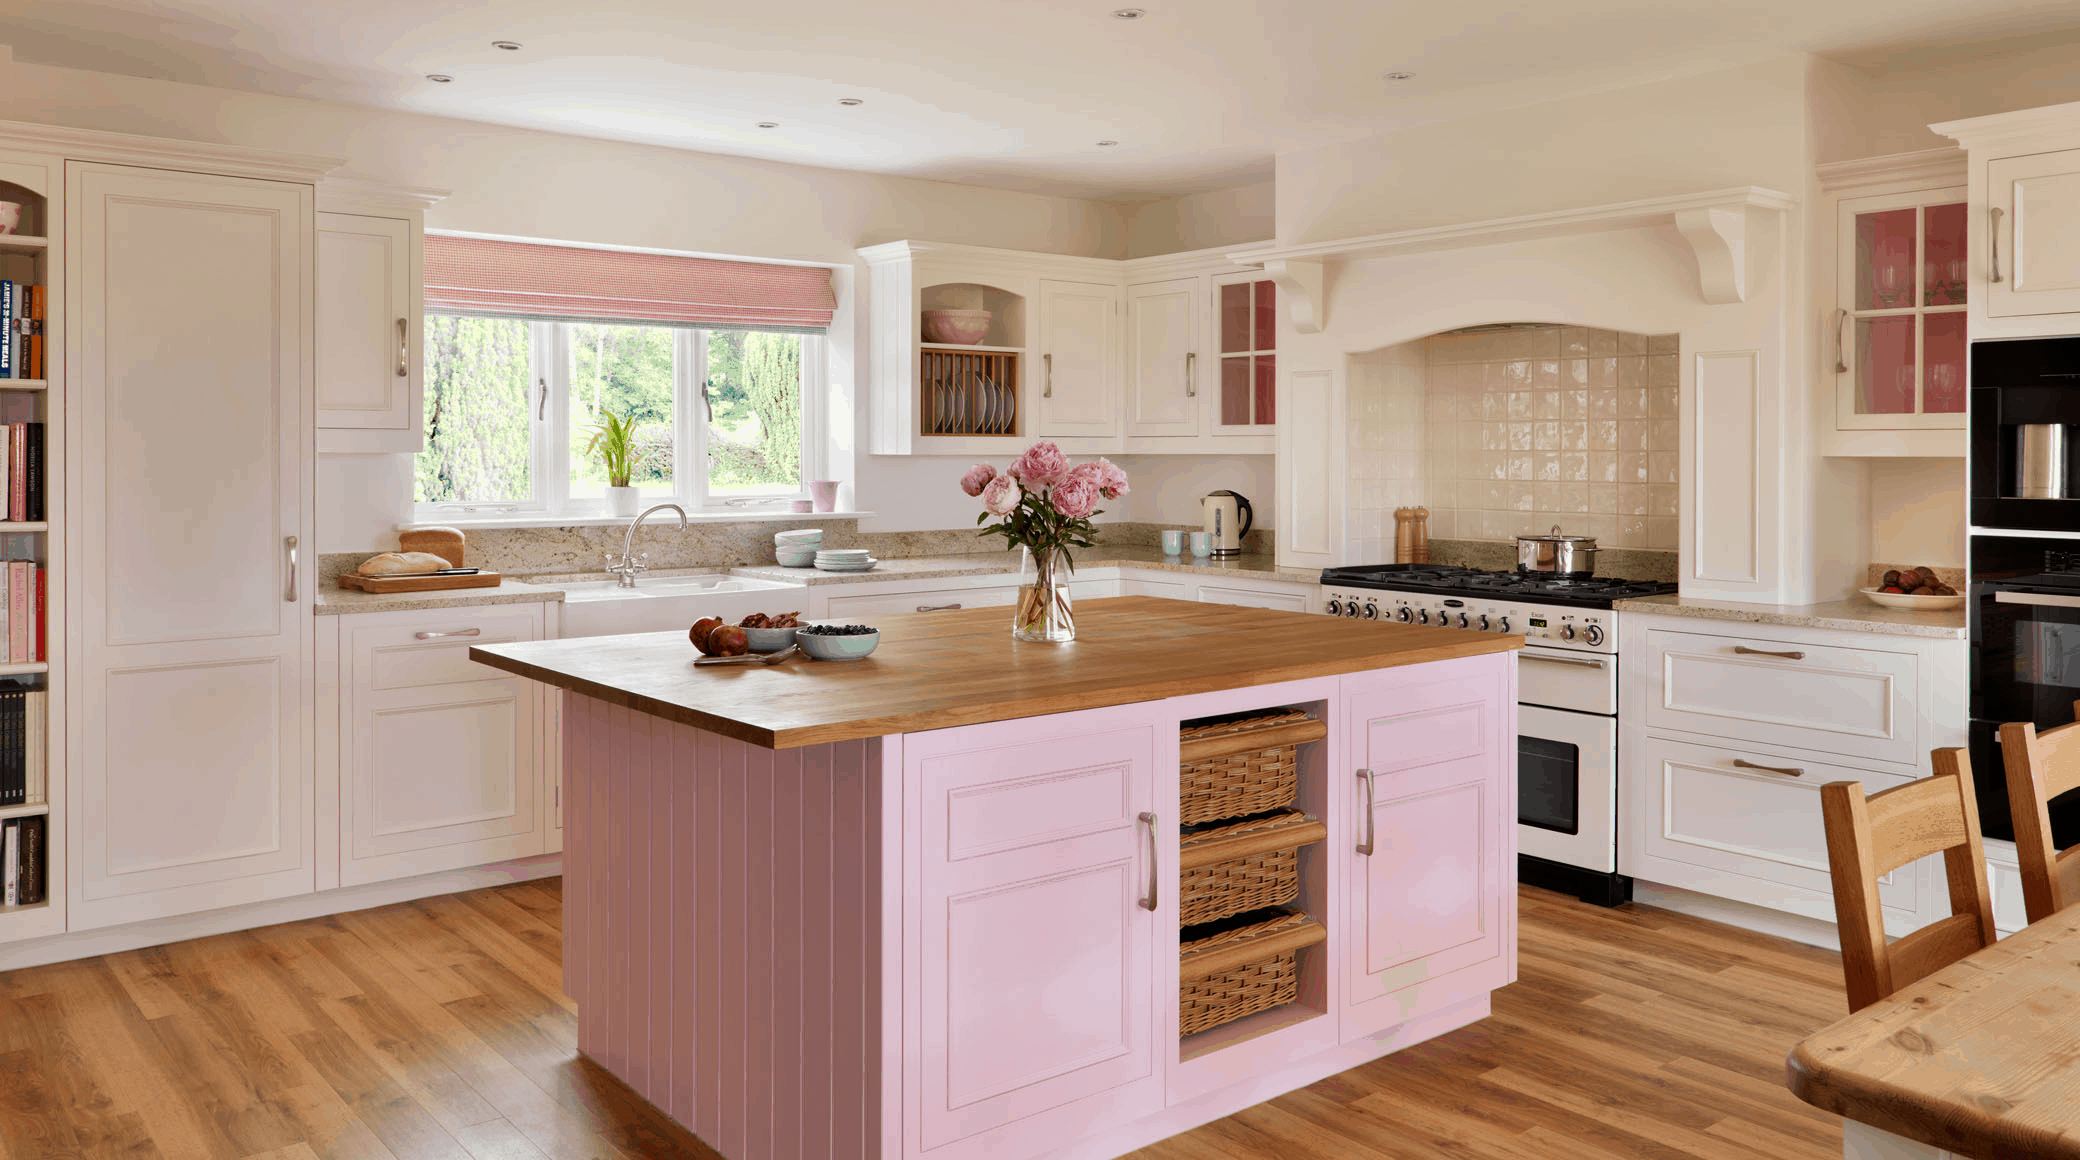 Even though pink may seem like the last color you may incorporate into your kitchen.